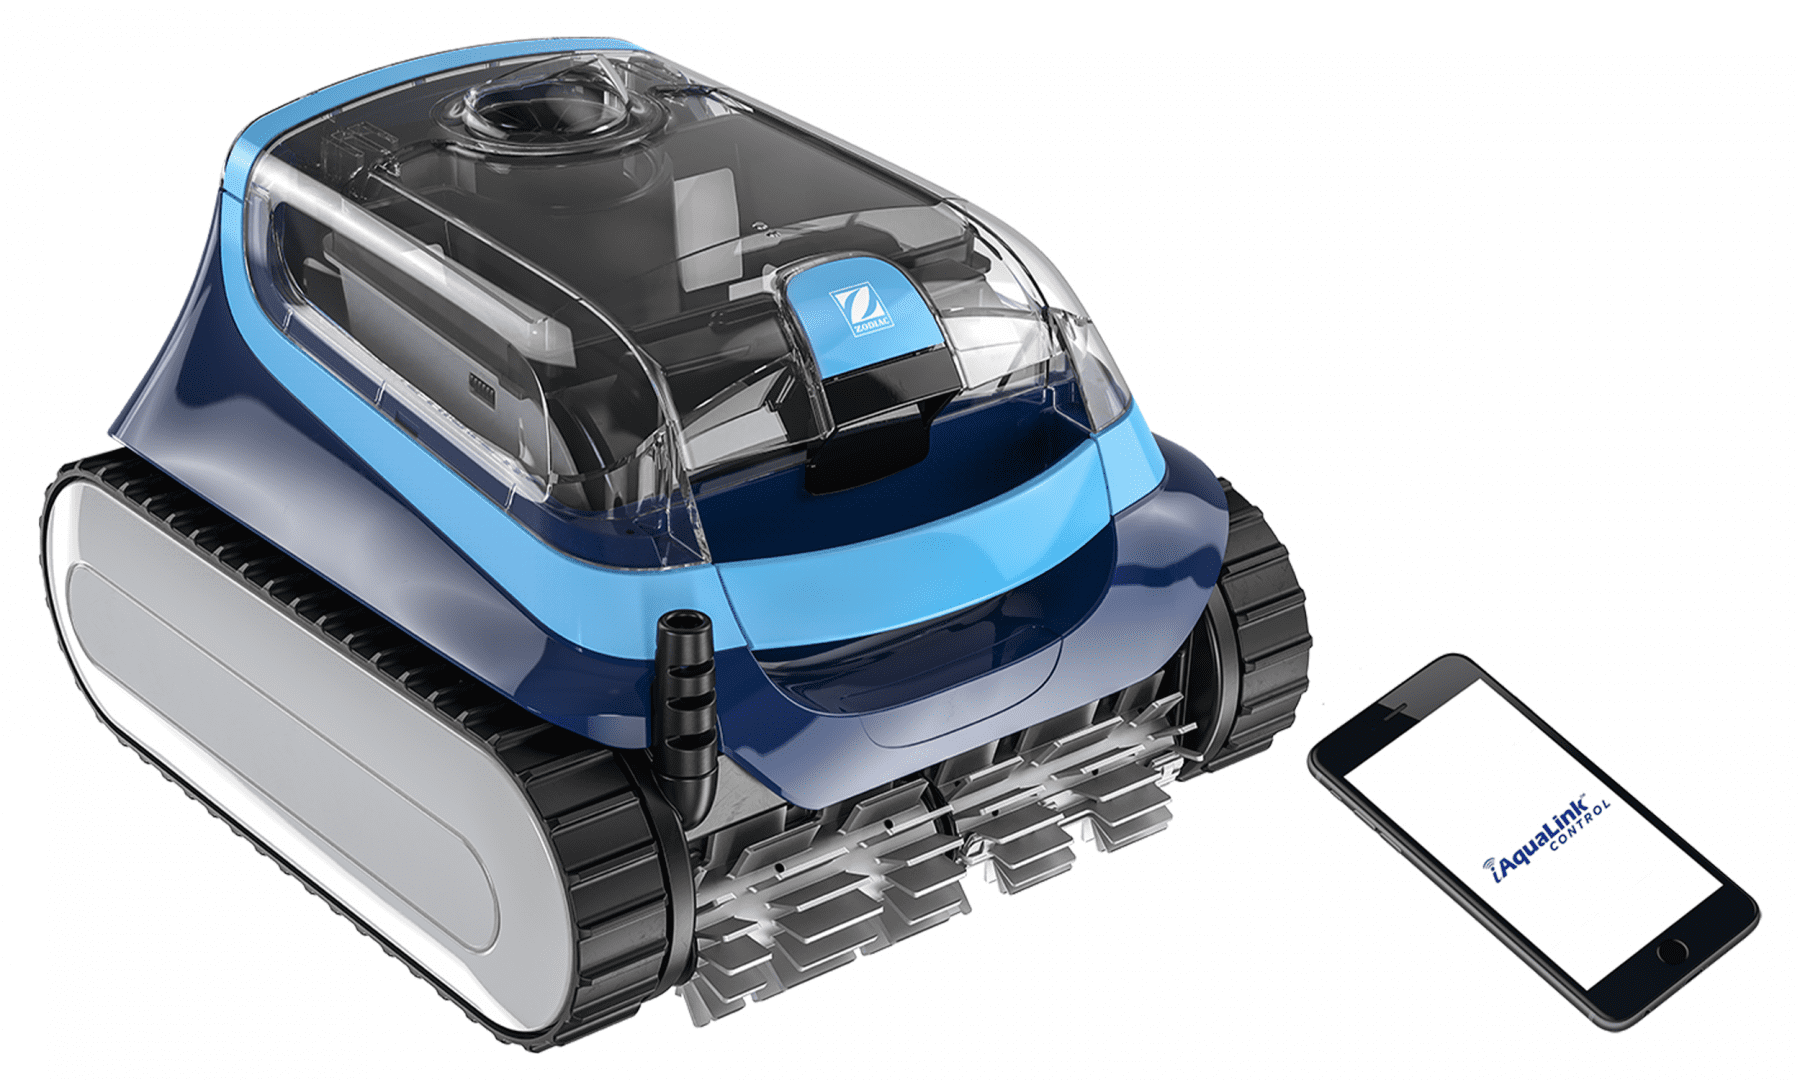 Dolphin E35 Poolroboter mit Transportwagen und time4wellness Poly Filter Compact 